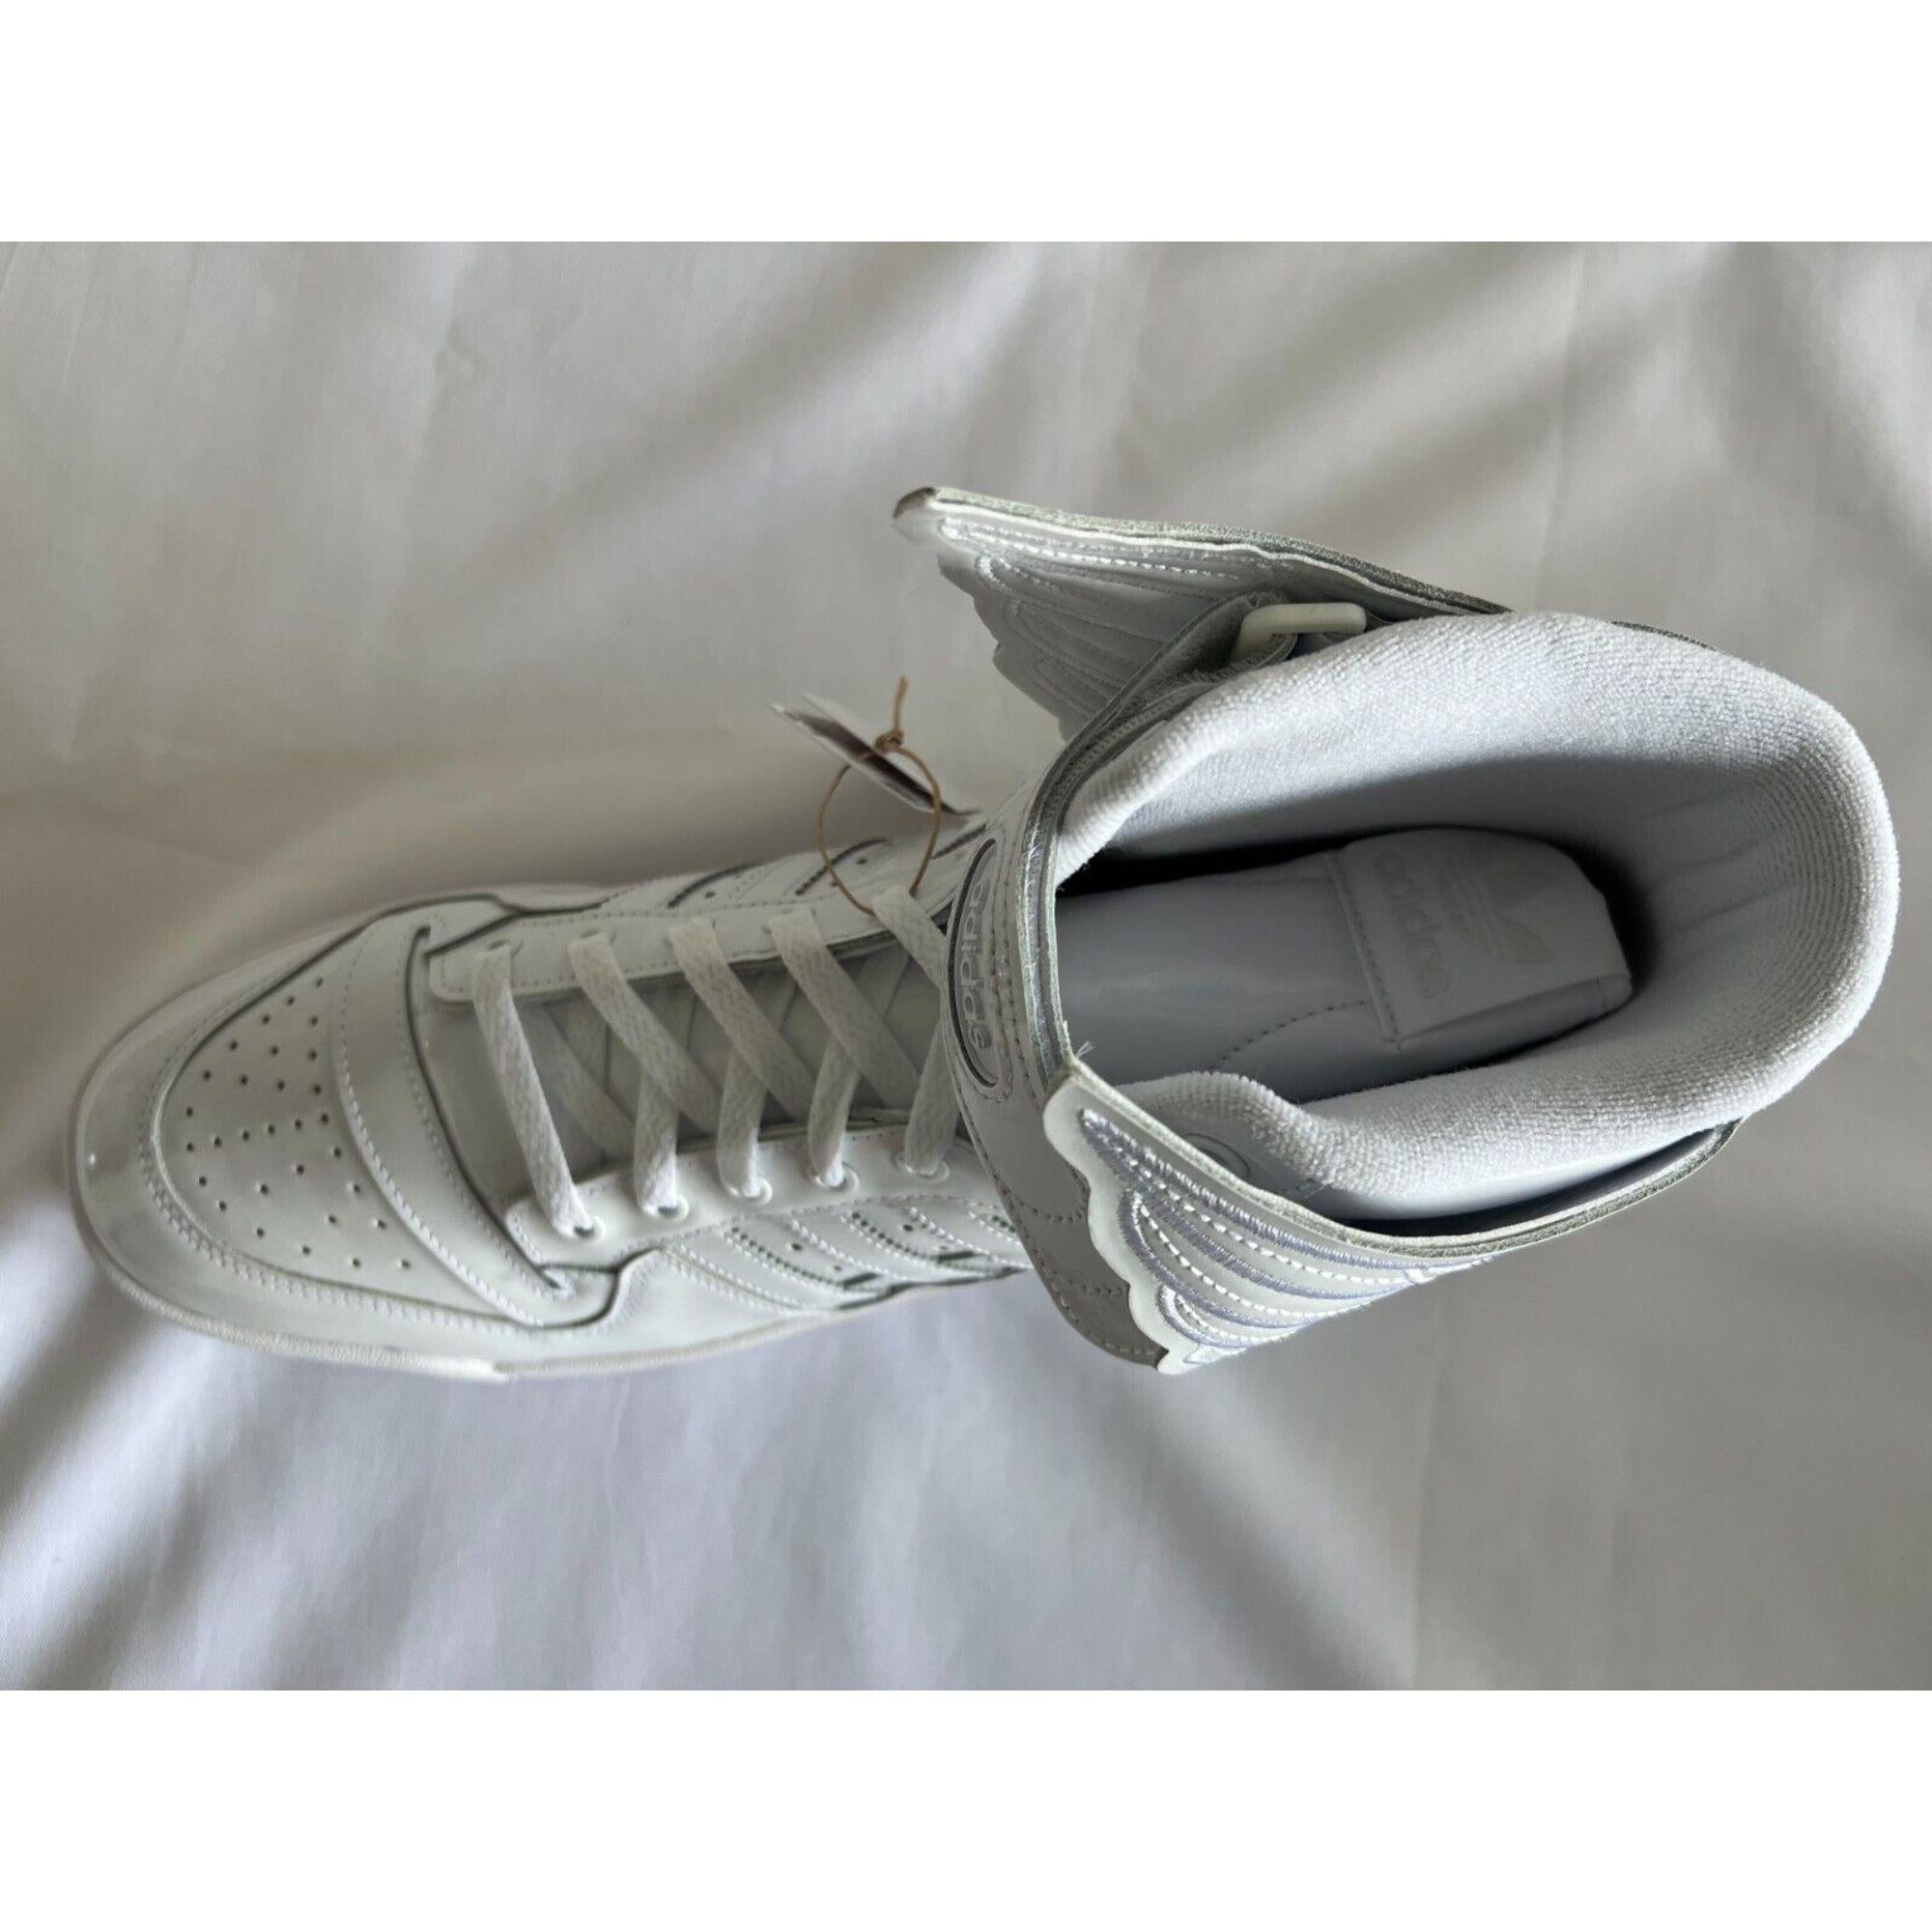 Adidas Originals ObyO Wings 4.0 Core Cloud Sneakers by Jeremy Scott, Size 14 In New Condition For Sale In Matthews, NC